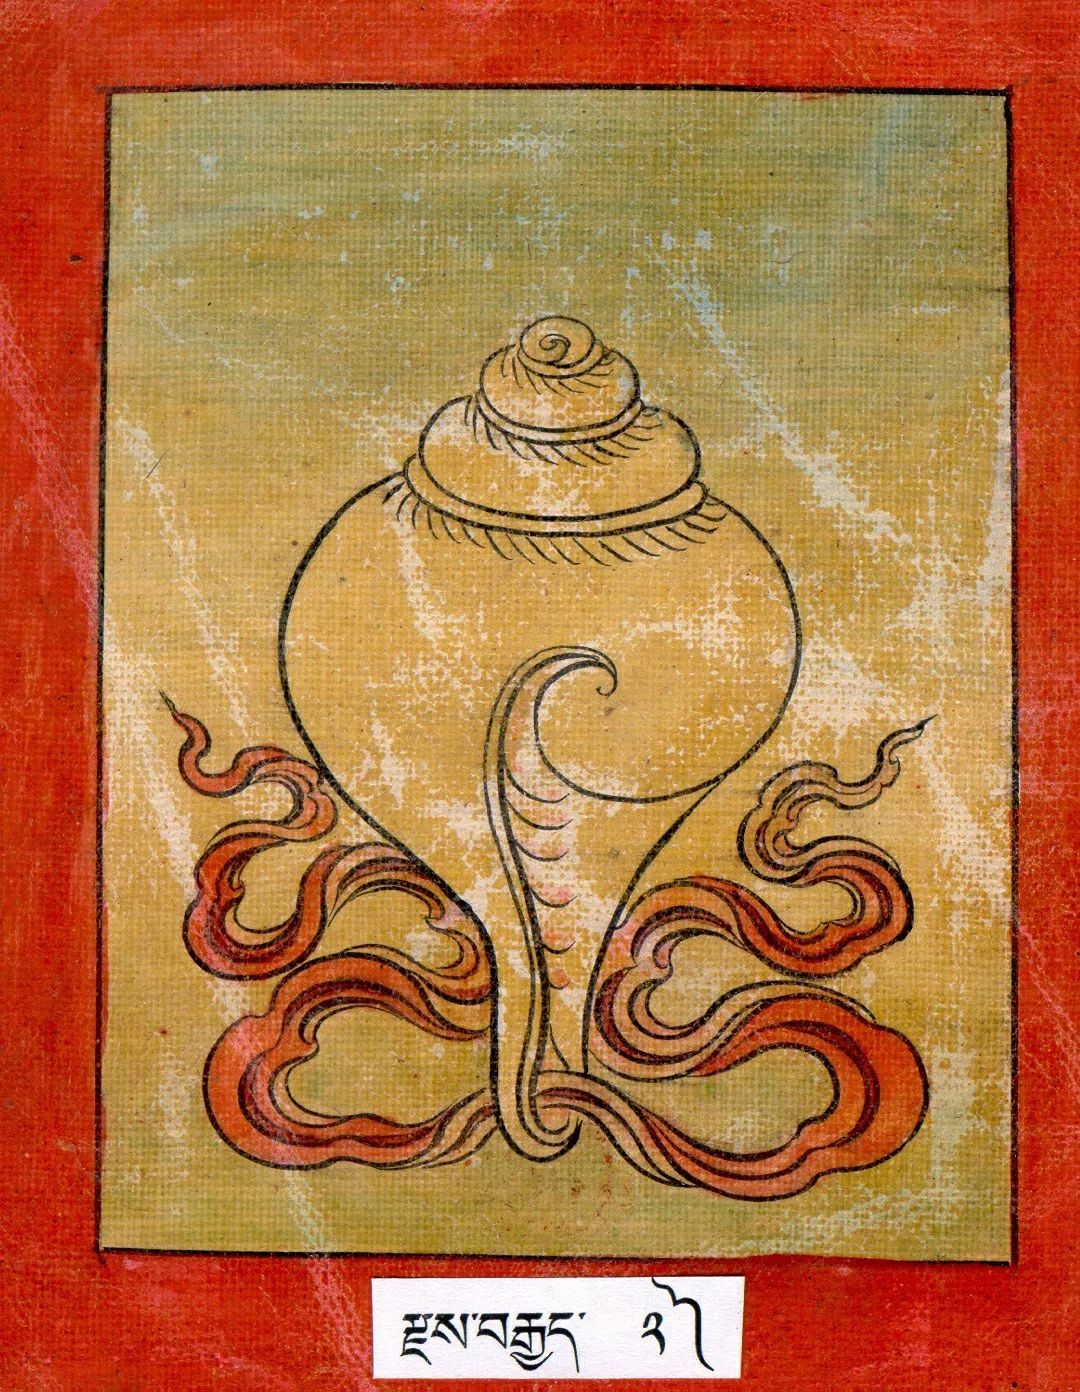 Sound the mystical sound full of spirituality: Conch in Himalayan Art.